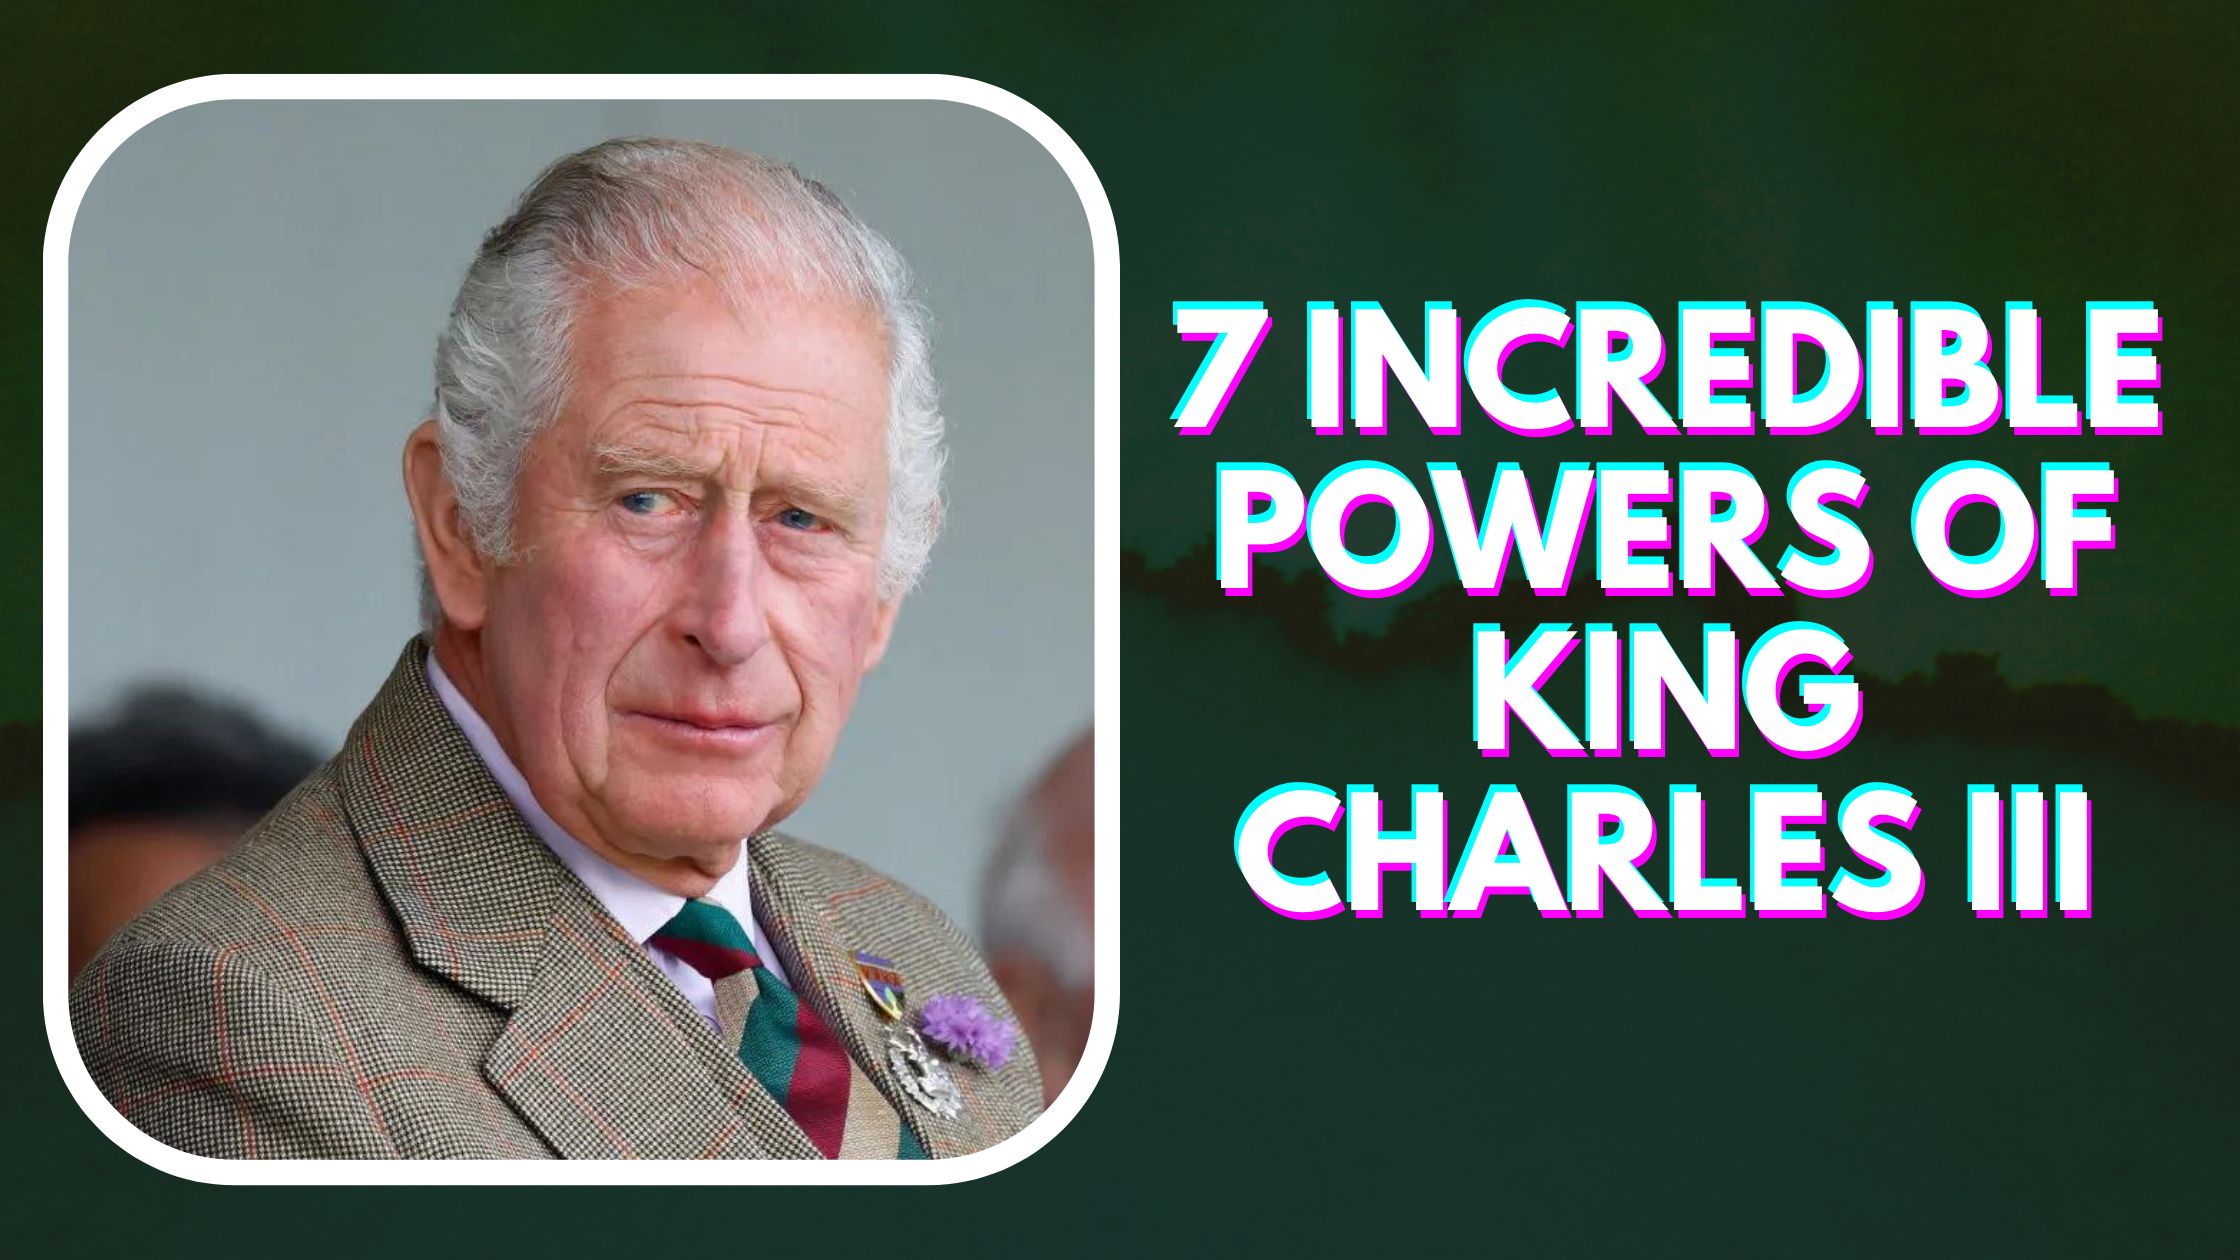 7 Incredible Powers Of King Charles III, The New King of The United Kingdom.